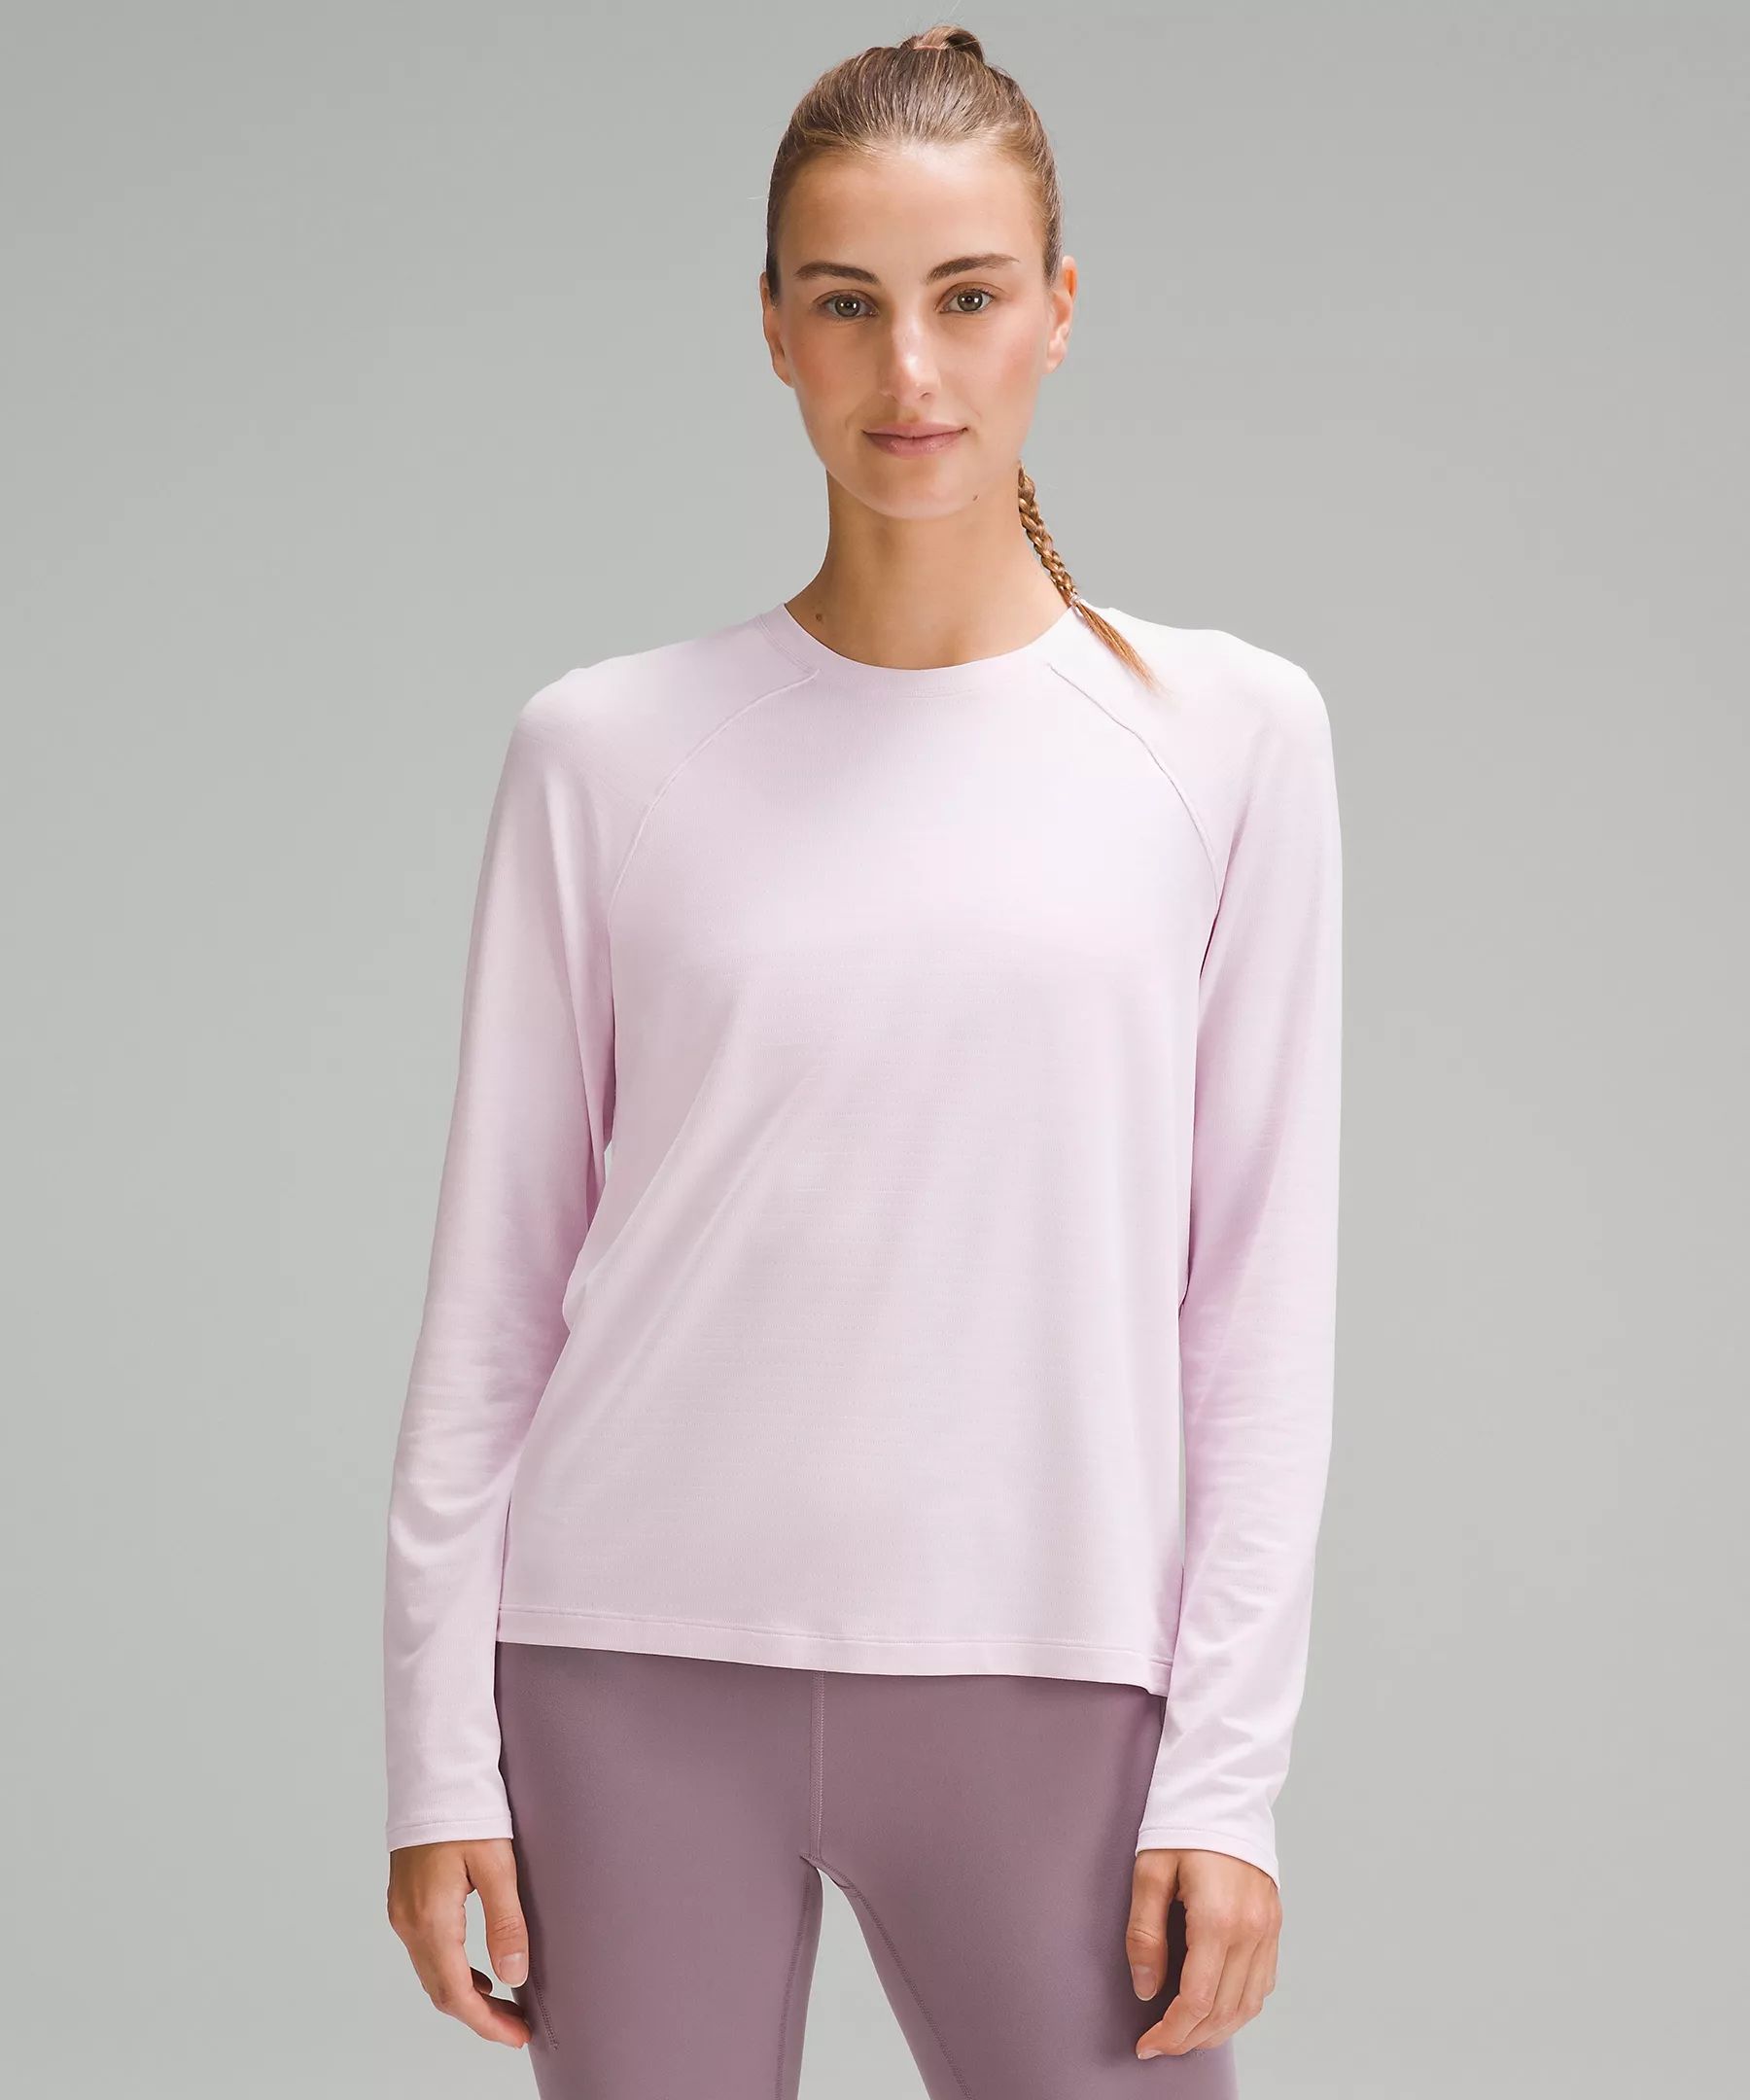 License to Train Classic-Fit Long-Sleeve Shirt | Women's Long Sleeve Shirts | lululemon | Lululemon (US)